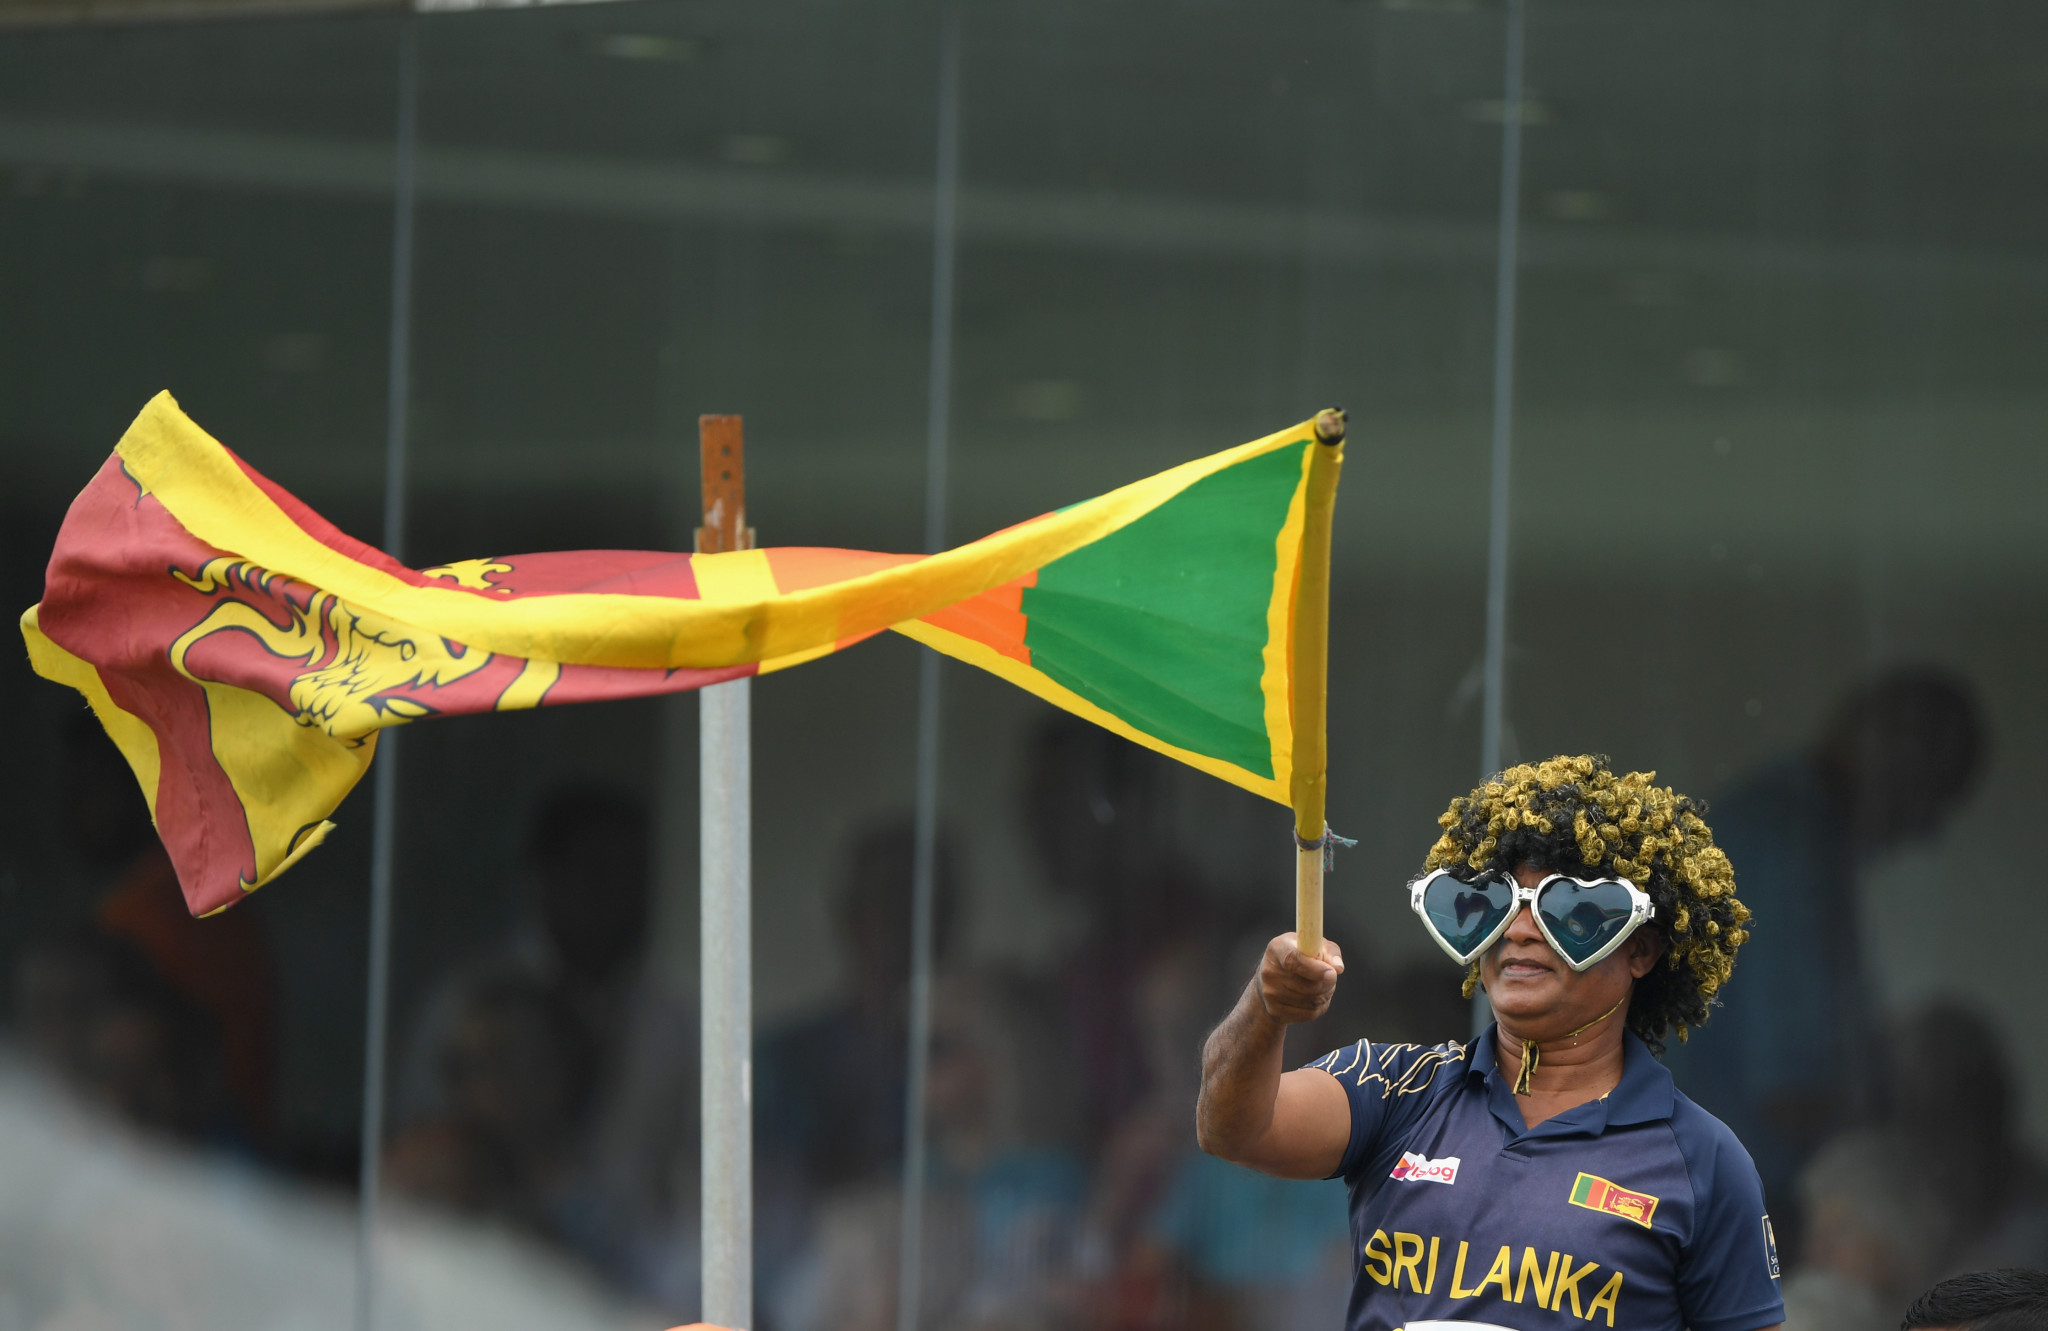 Sri Lanka have been labelled cricket's most corrupt nation by the sport's governing body, their Sports Minister has claimed ©Getty Images